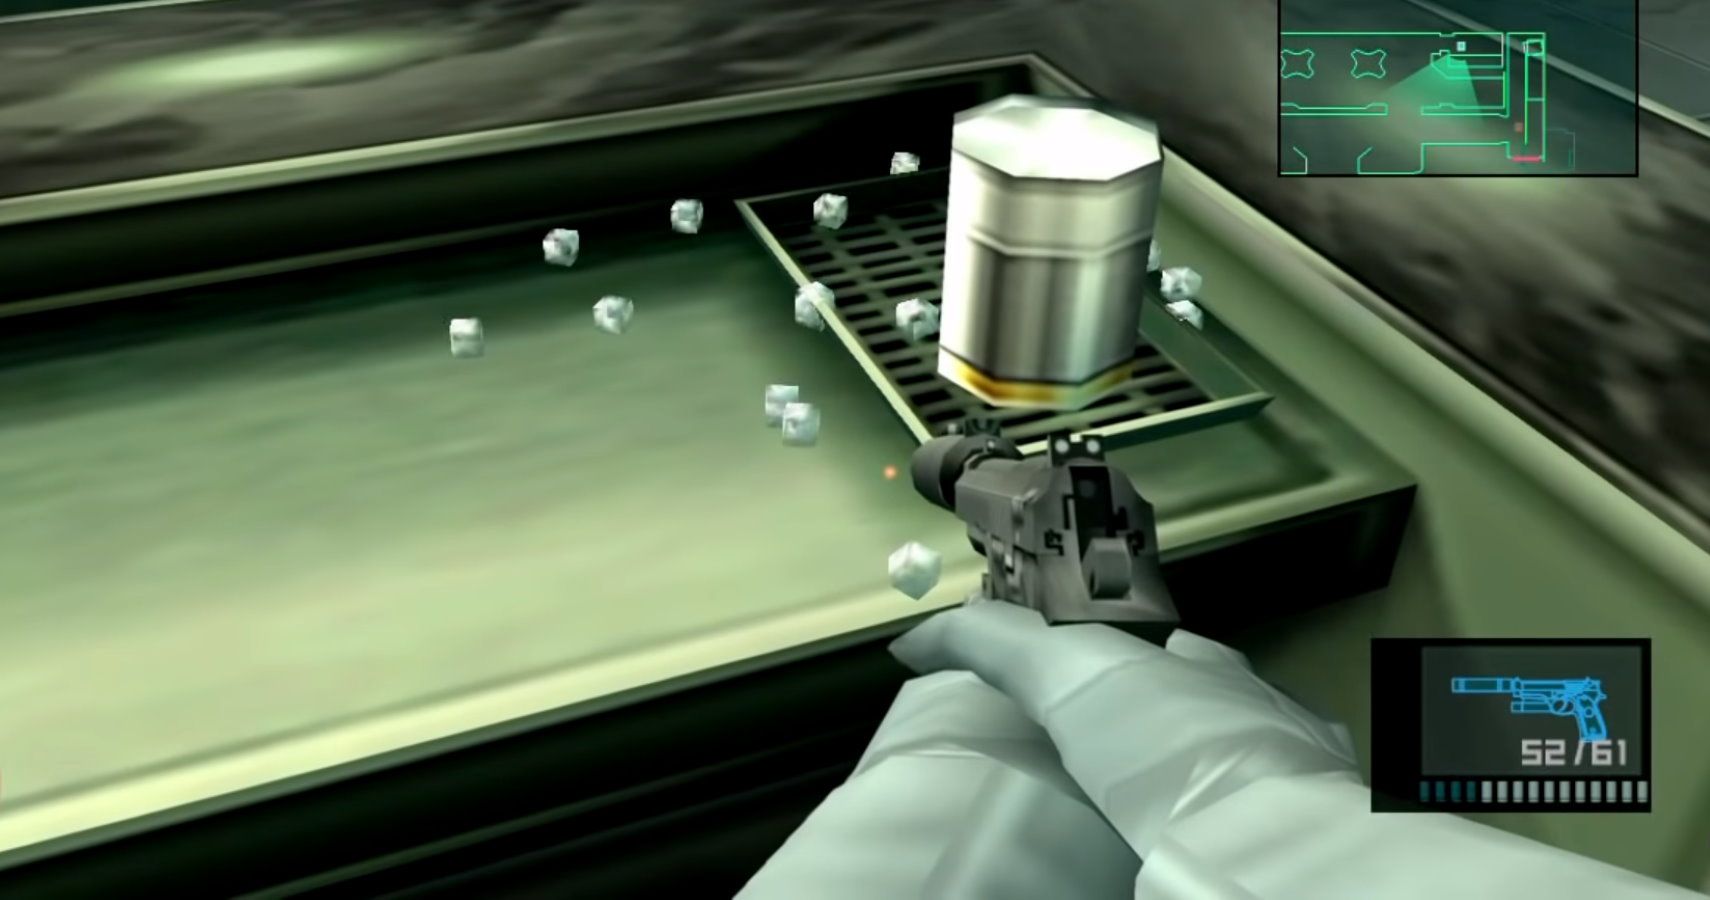 ridiculous video games details - Metal Gear Solid 2 bucket of ice mgs2 - 52761